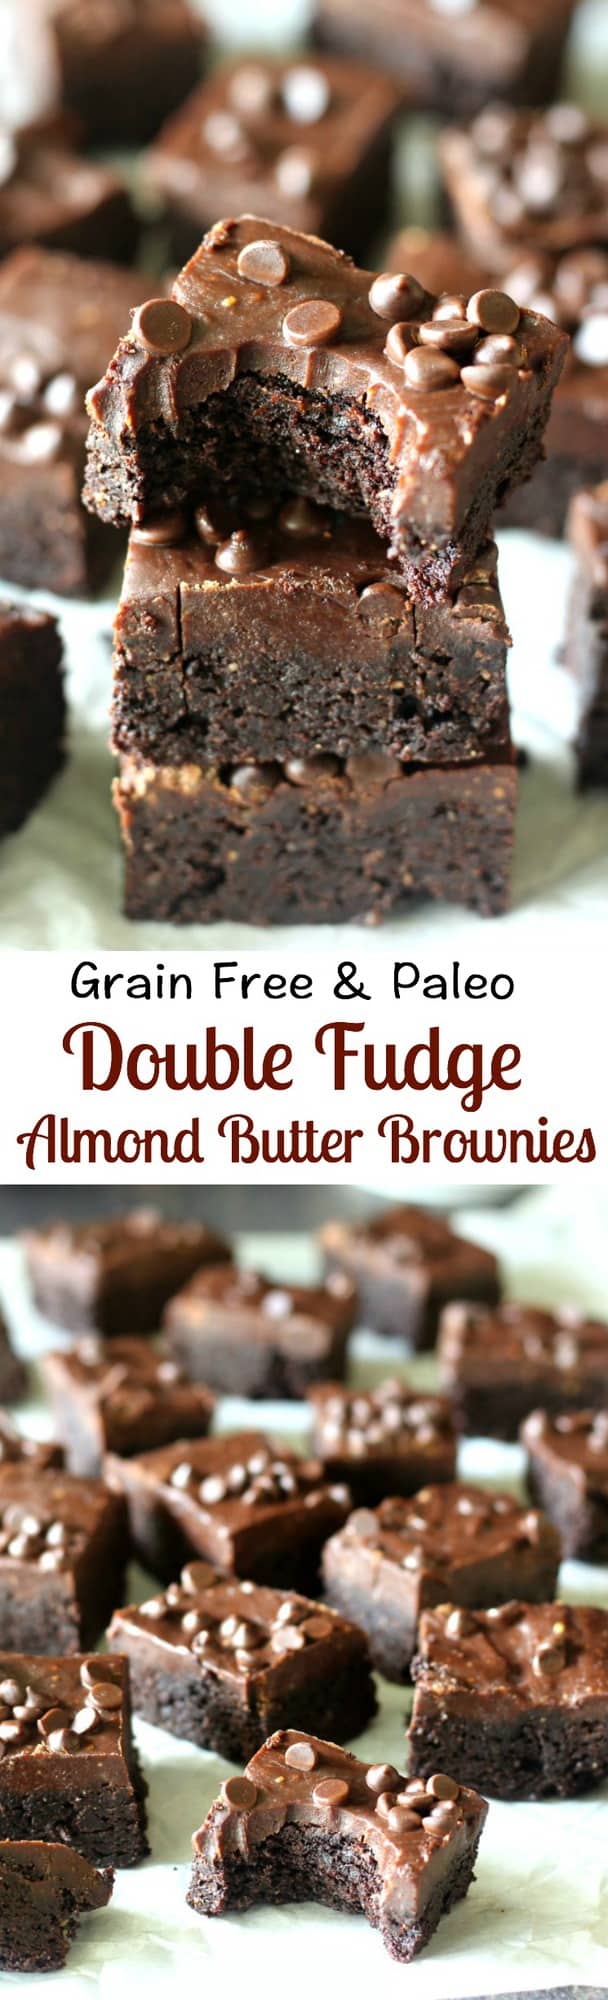 Grain Free and Paleo Double Fudge Almond Butter Brownies - rich, decadent, gluten free, dairy free, soy free, no refined sugar